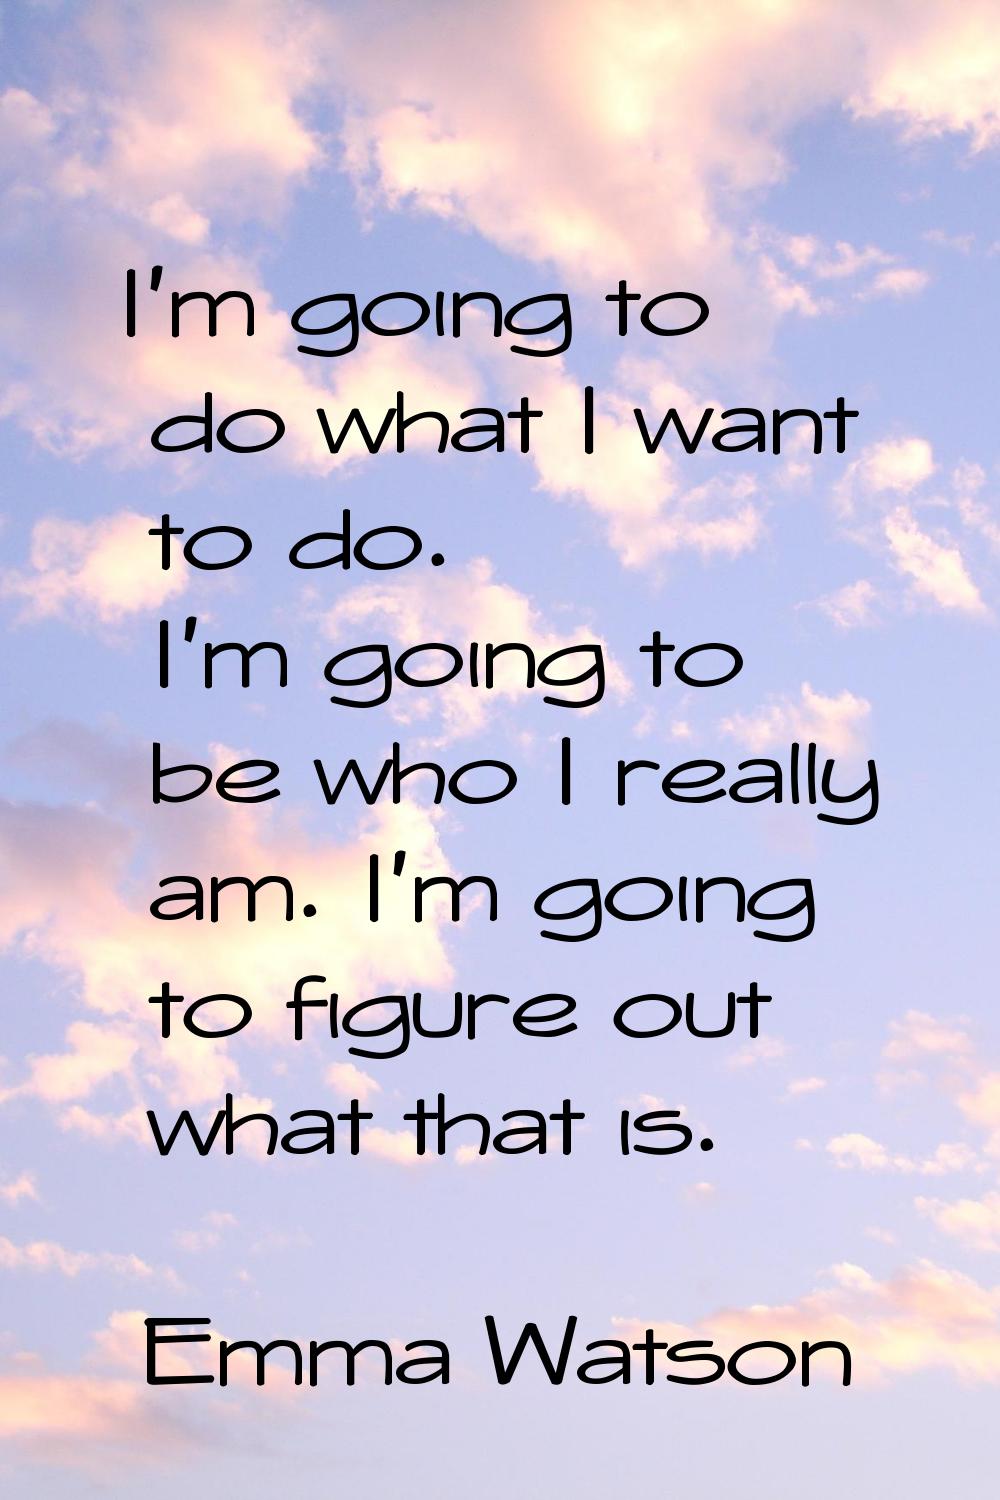 I'm going to do what I want to do. I'm going to be who I really am. I'm going to figure out what th